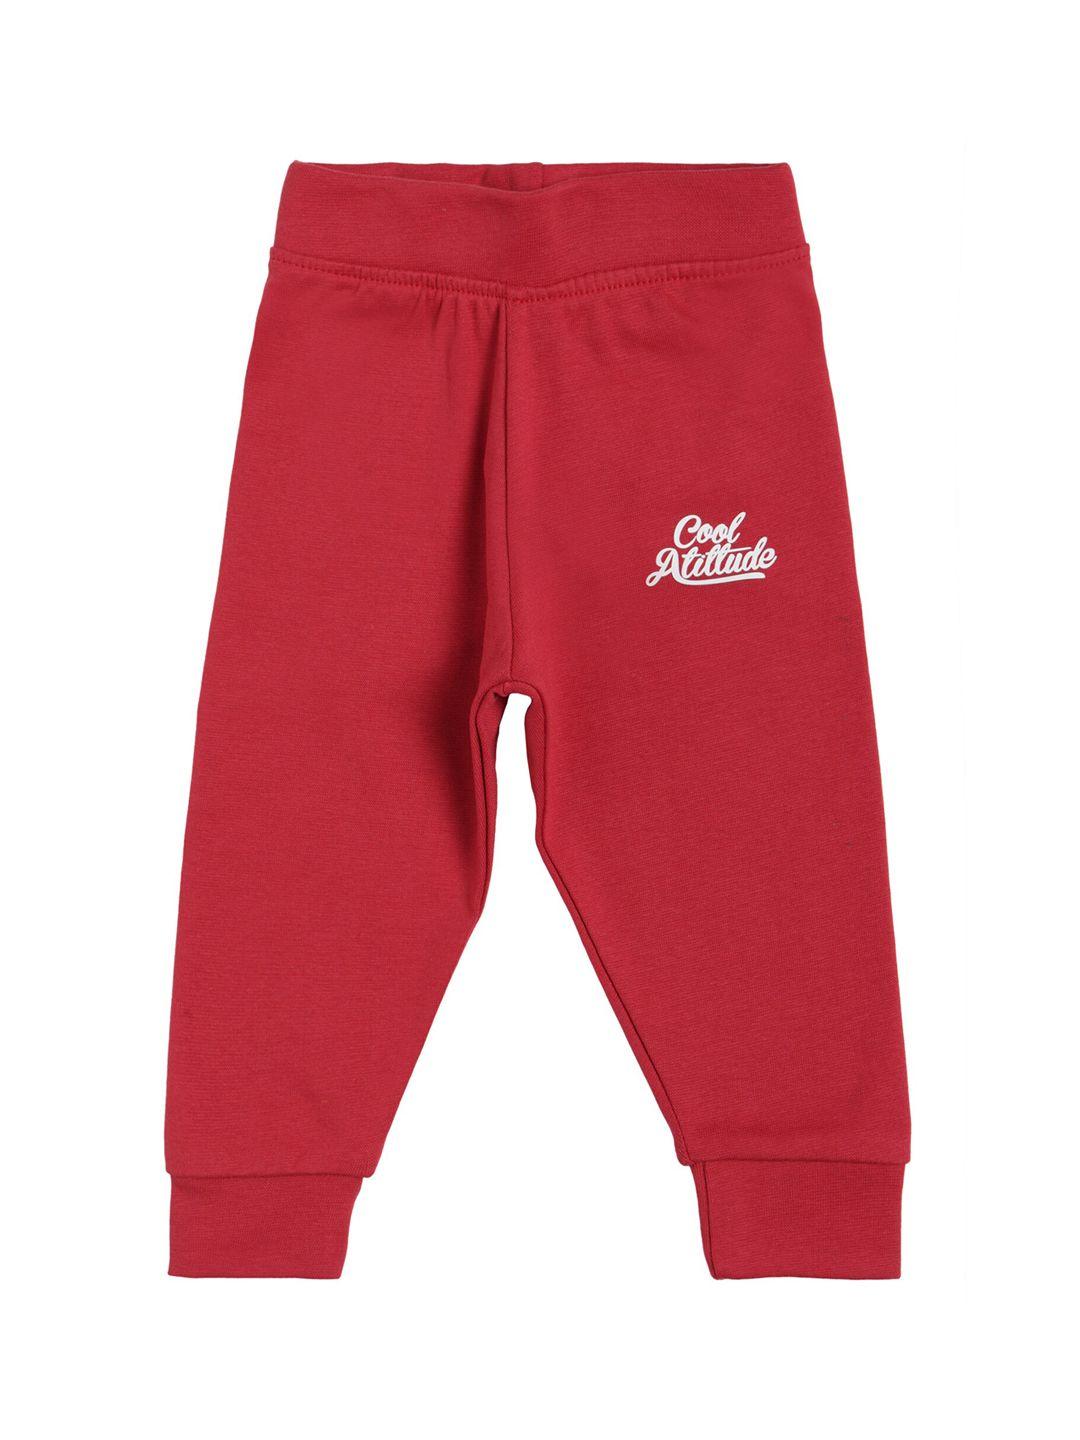 bodycare kids boys red solid cotton track pants